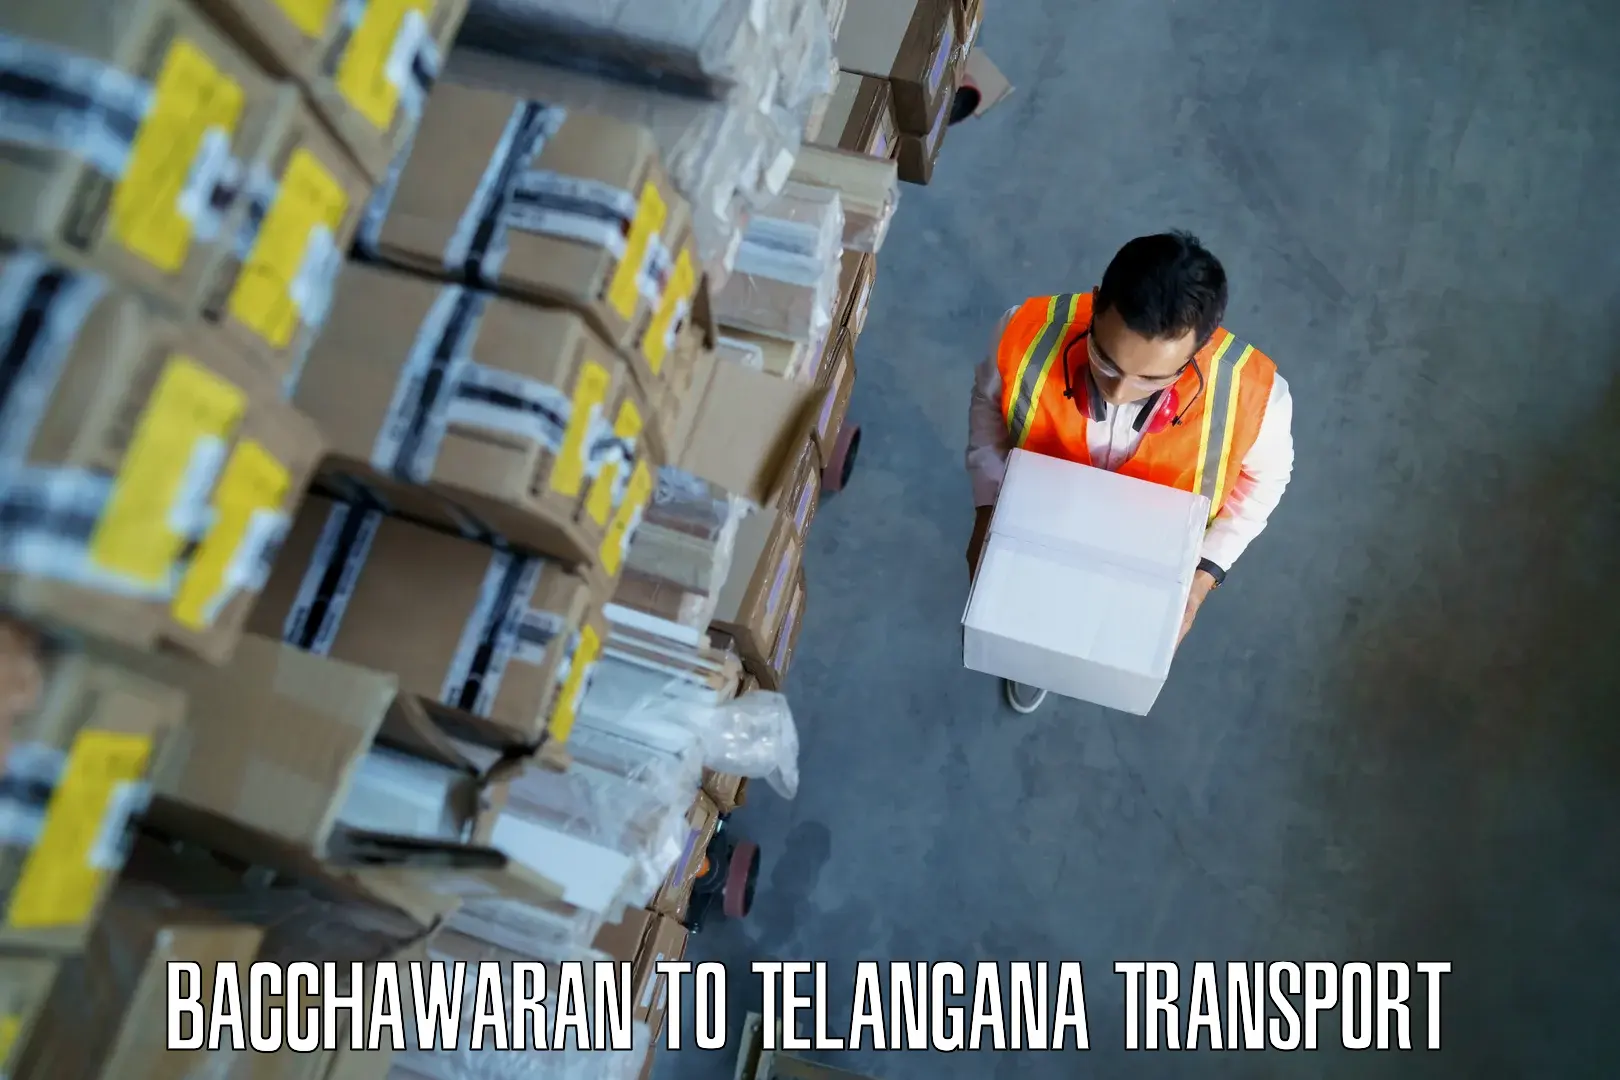 Transport services in Bacchawaran to Manneguda